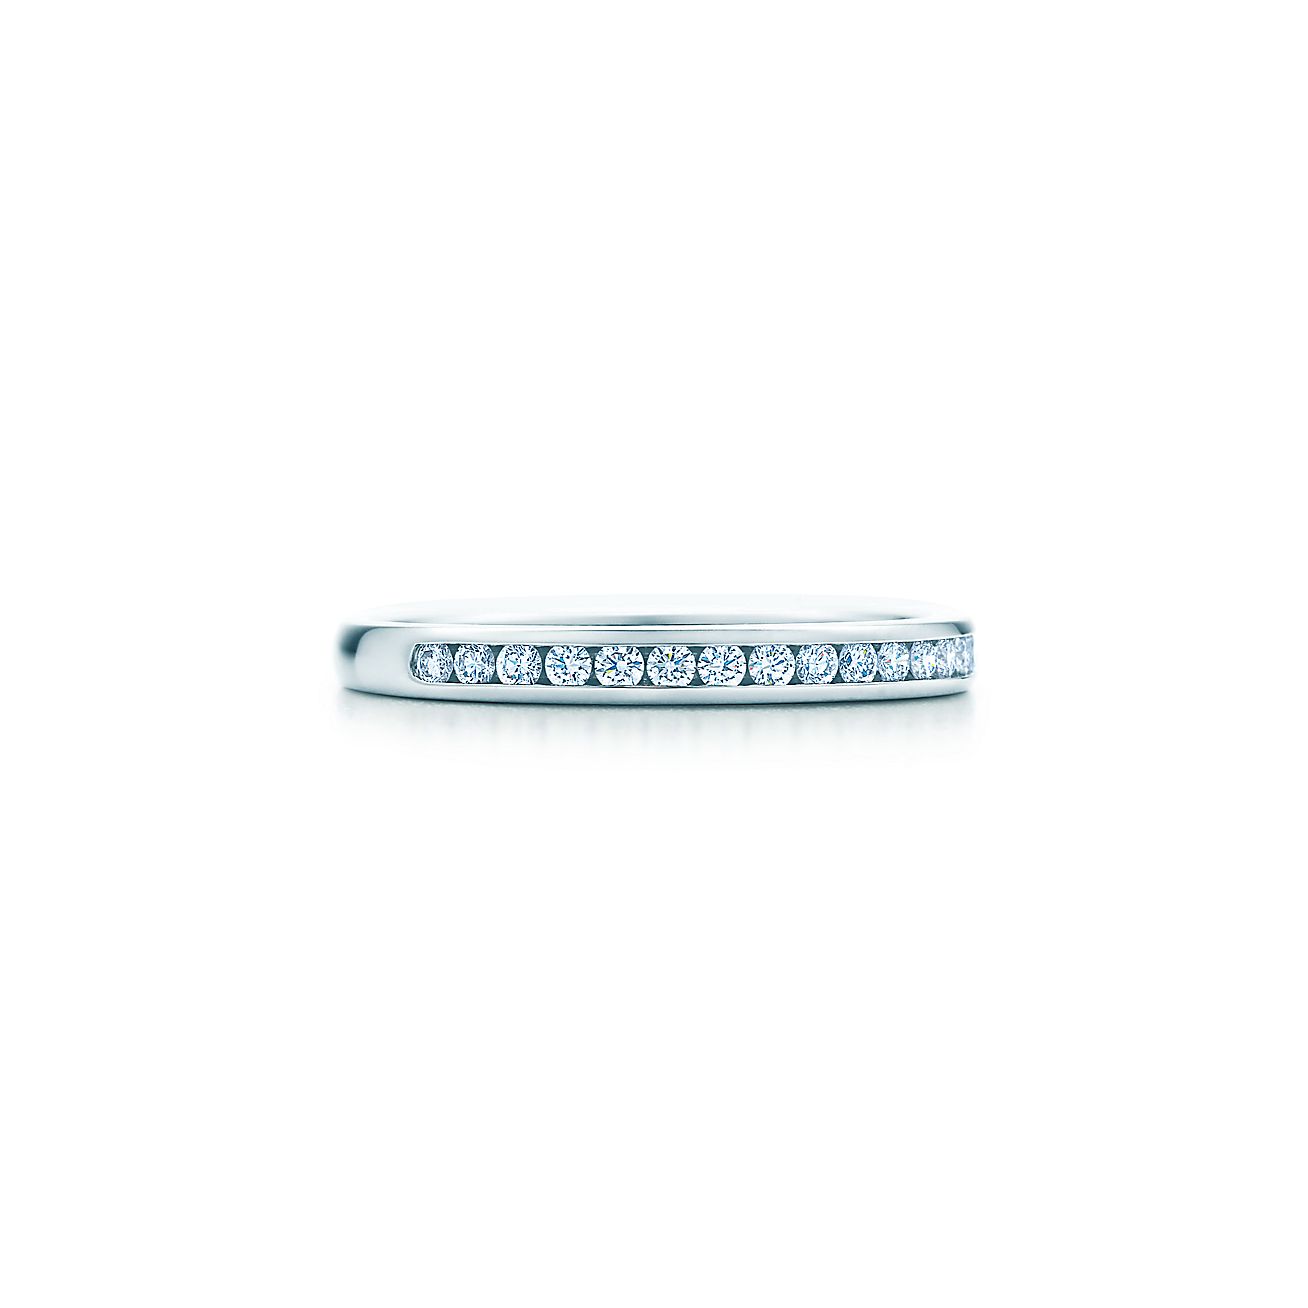 Tiffany® Setting Wedding Band in Platinum with a Half-circle of